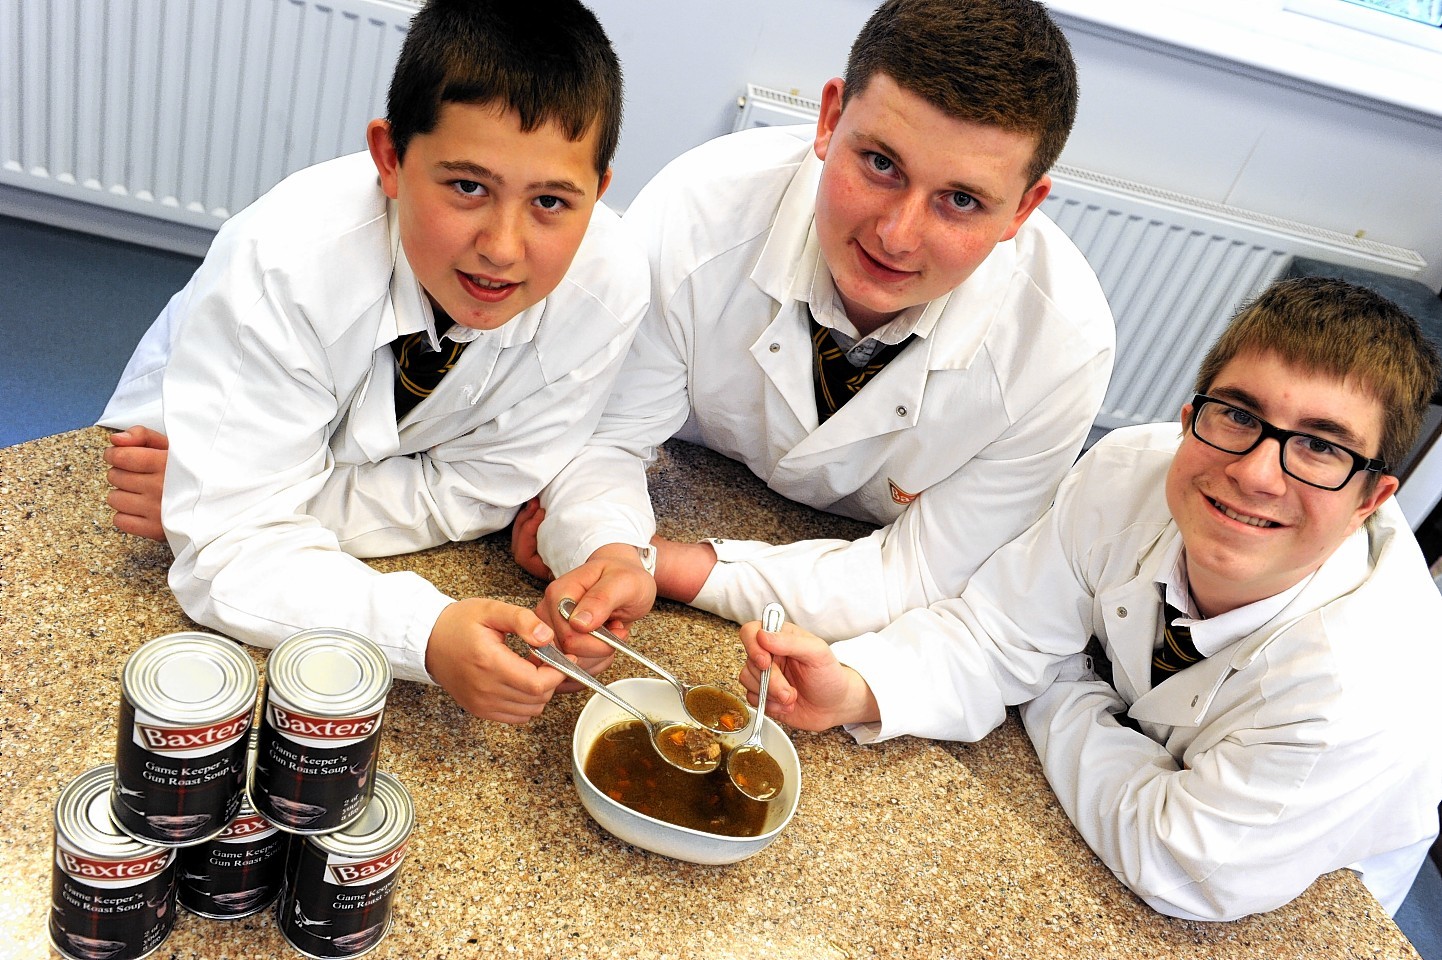 Pupils, Shaun McLeod, Euan McLean, and Christopher Gill, with the 'Gamekeeper's Gun Roast Soup'.
Picture by Gordon Lennox